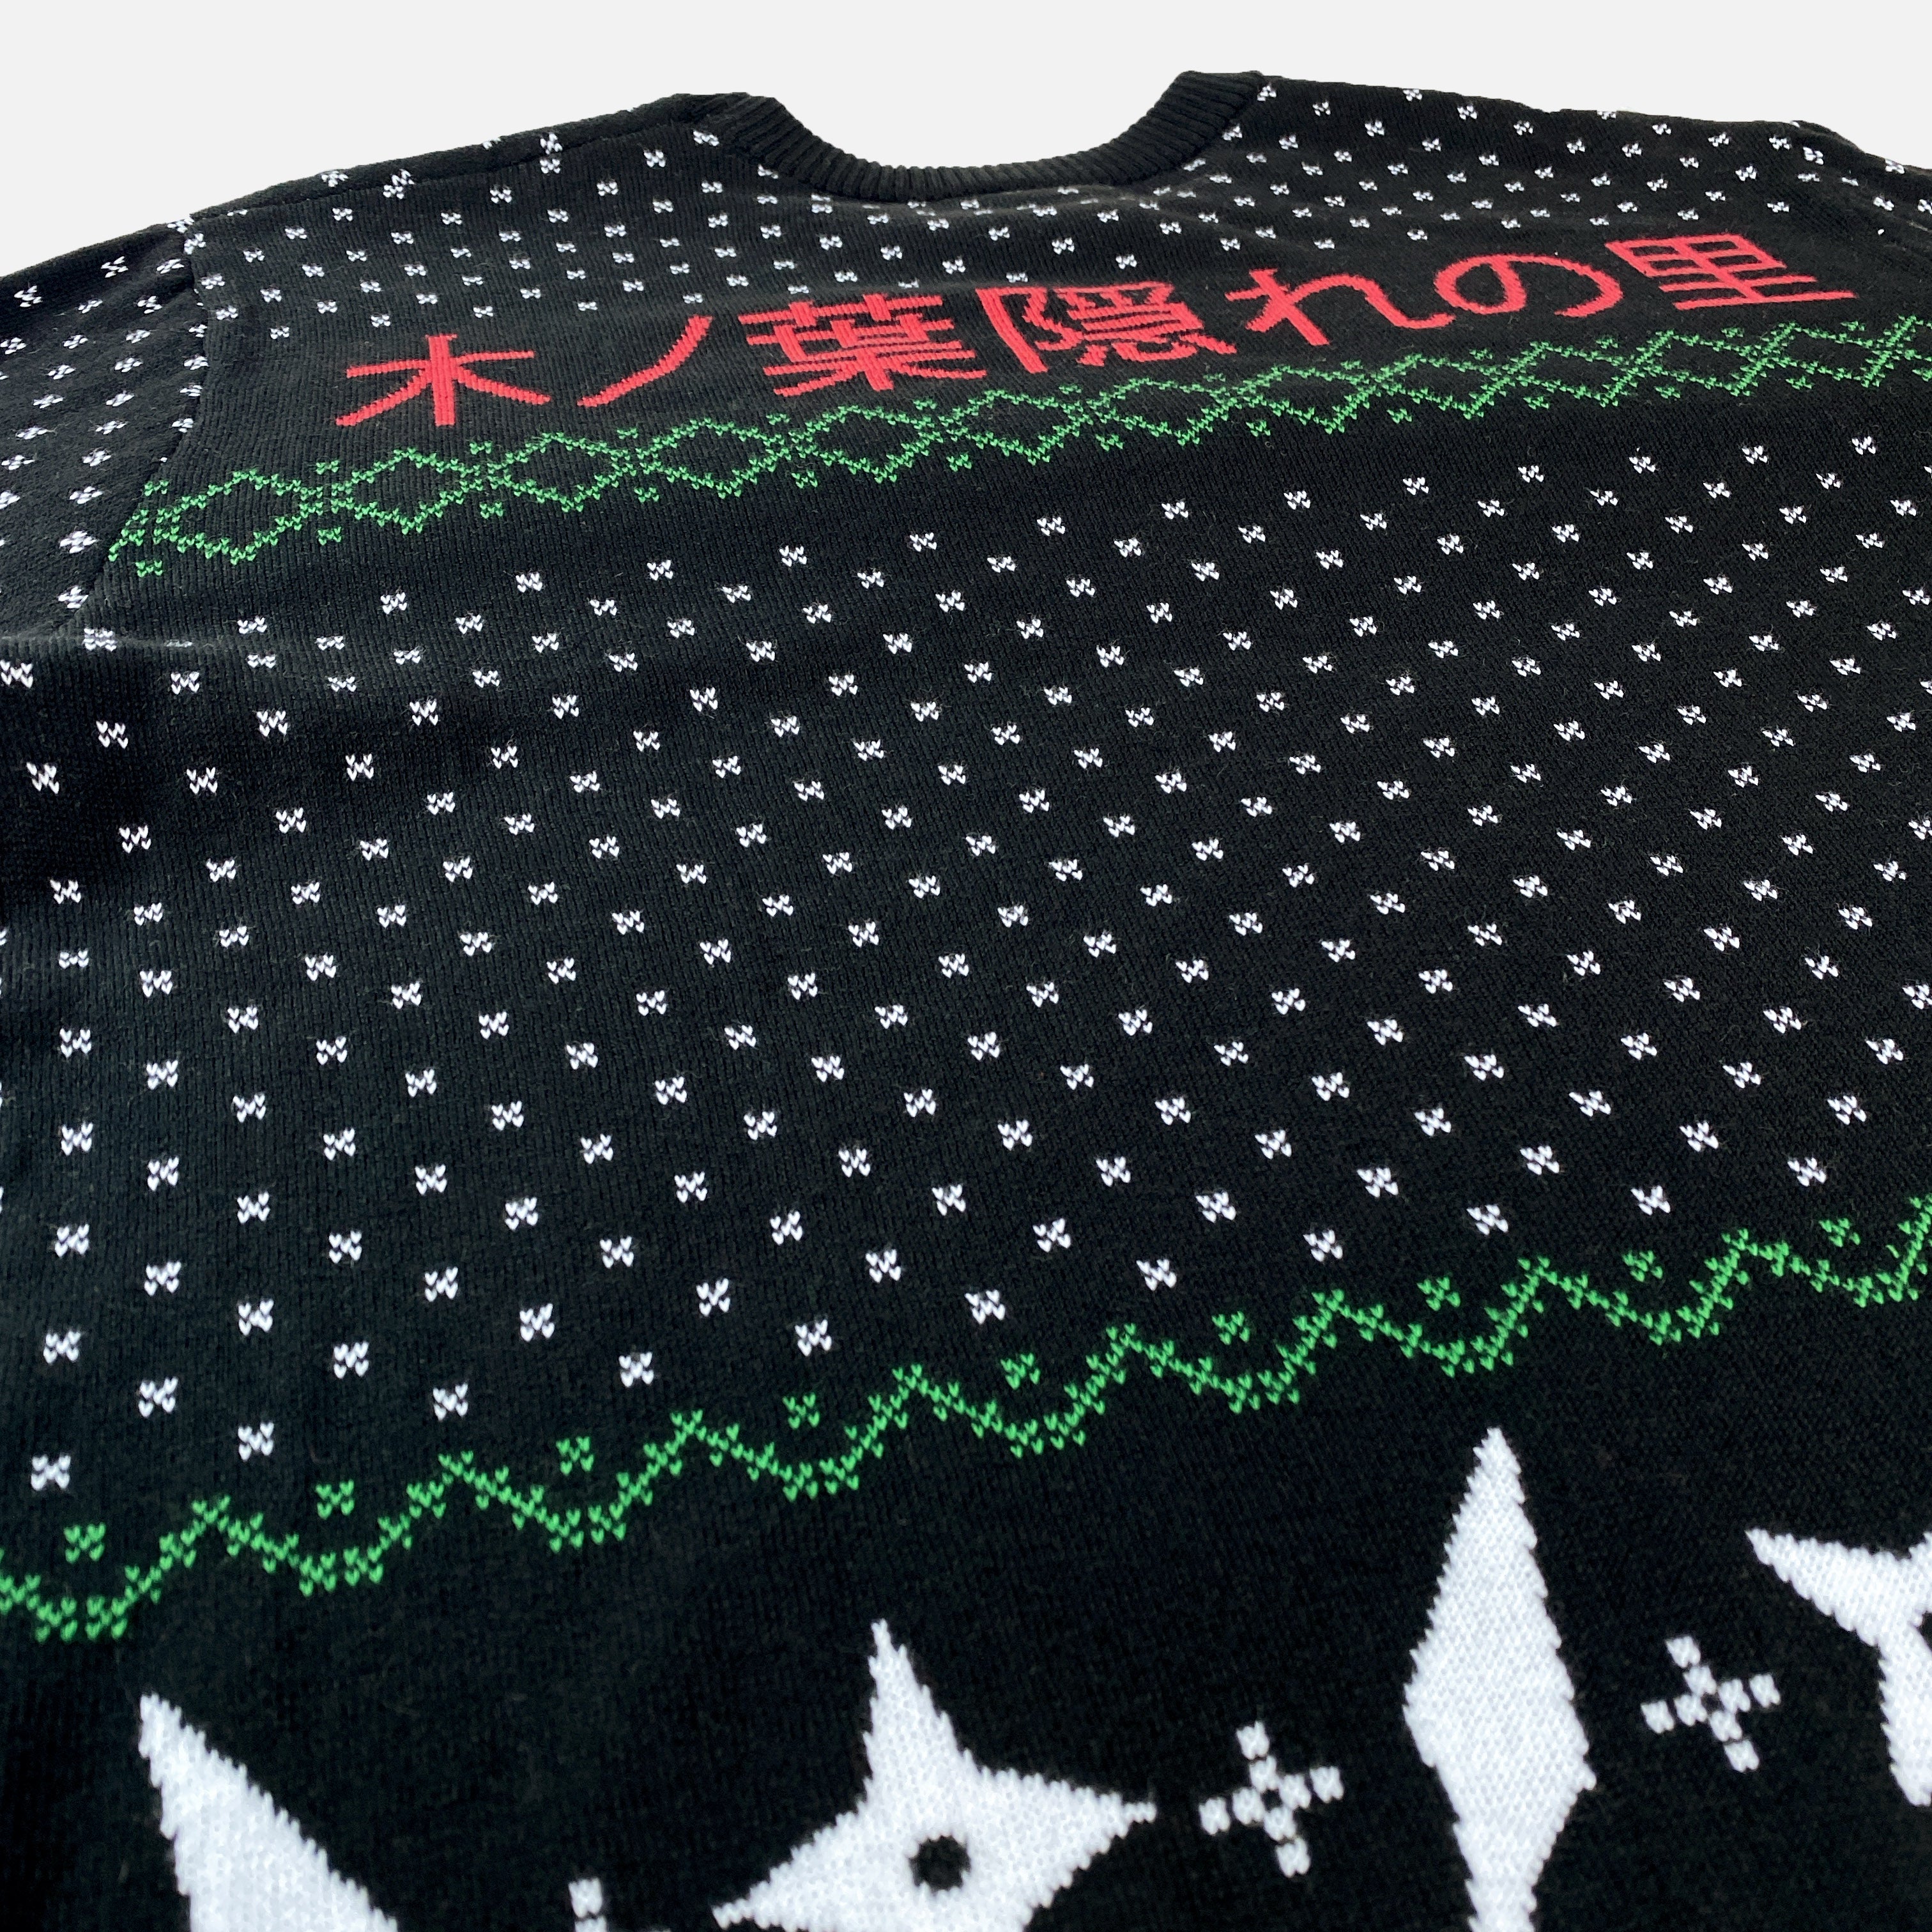 Naruto Shippuden - Hidden Leaf Village Holiday Sweater image count 3